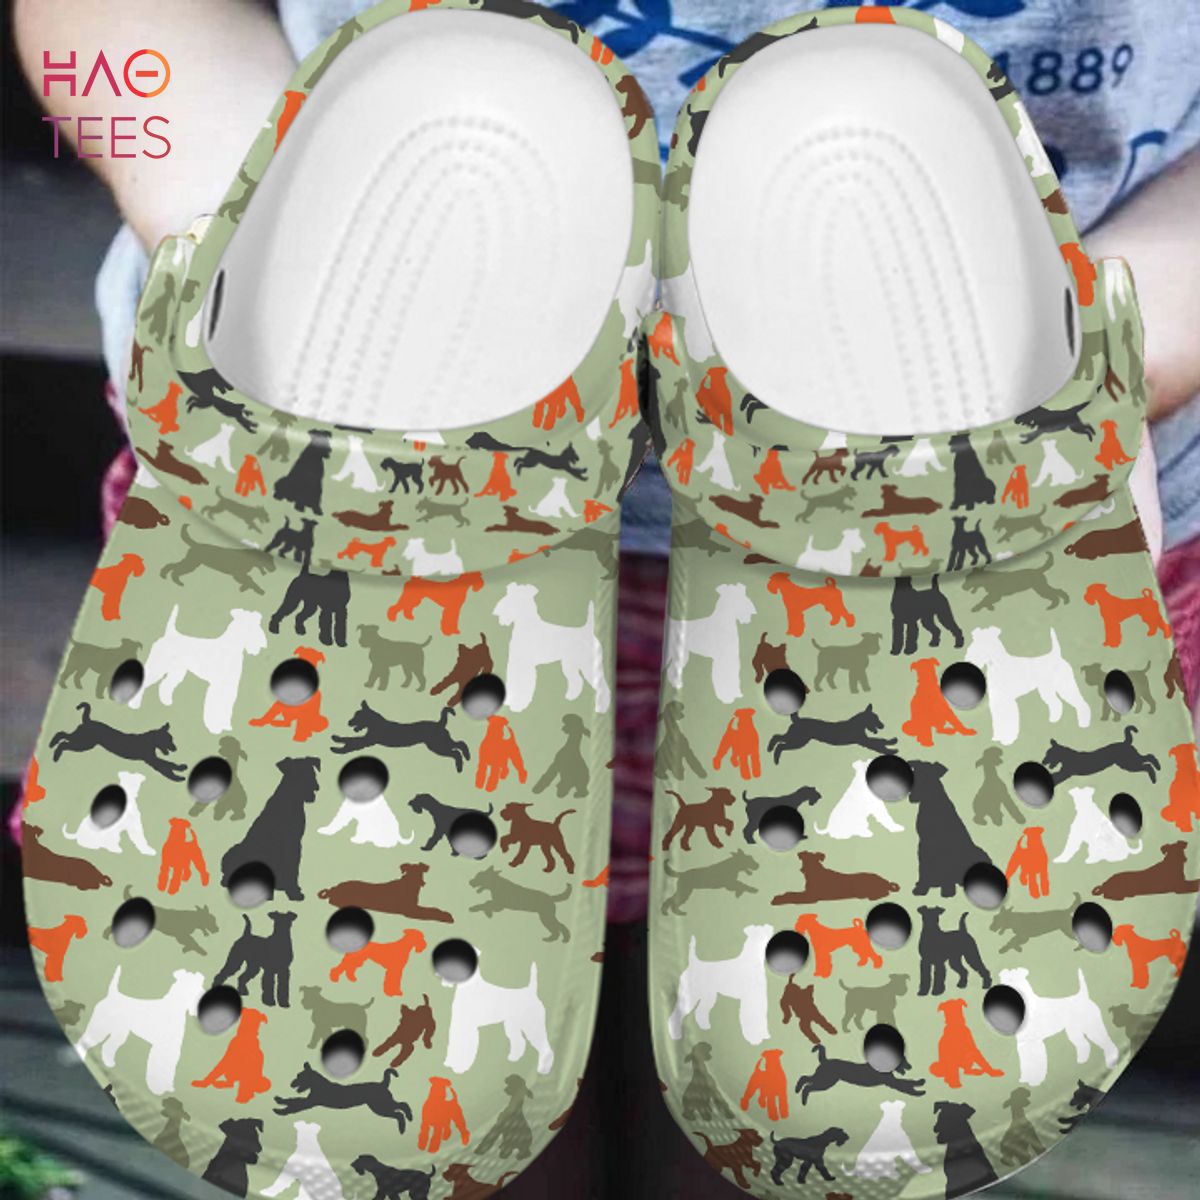 Airedale Terrier Camo Limited Edition Slippers